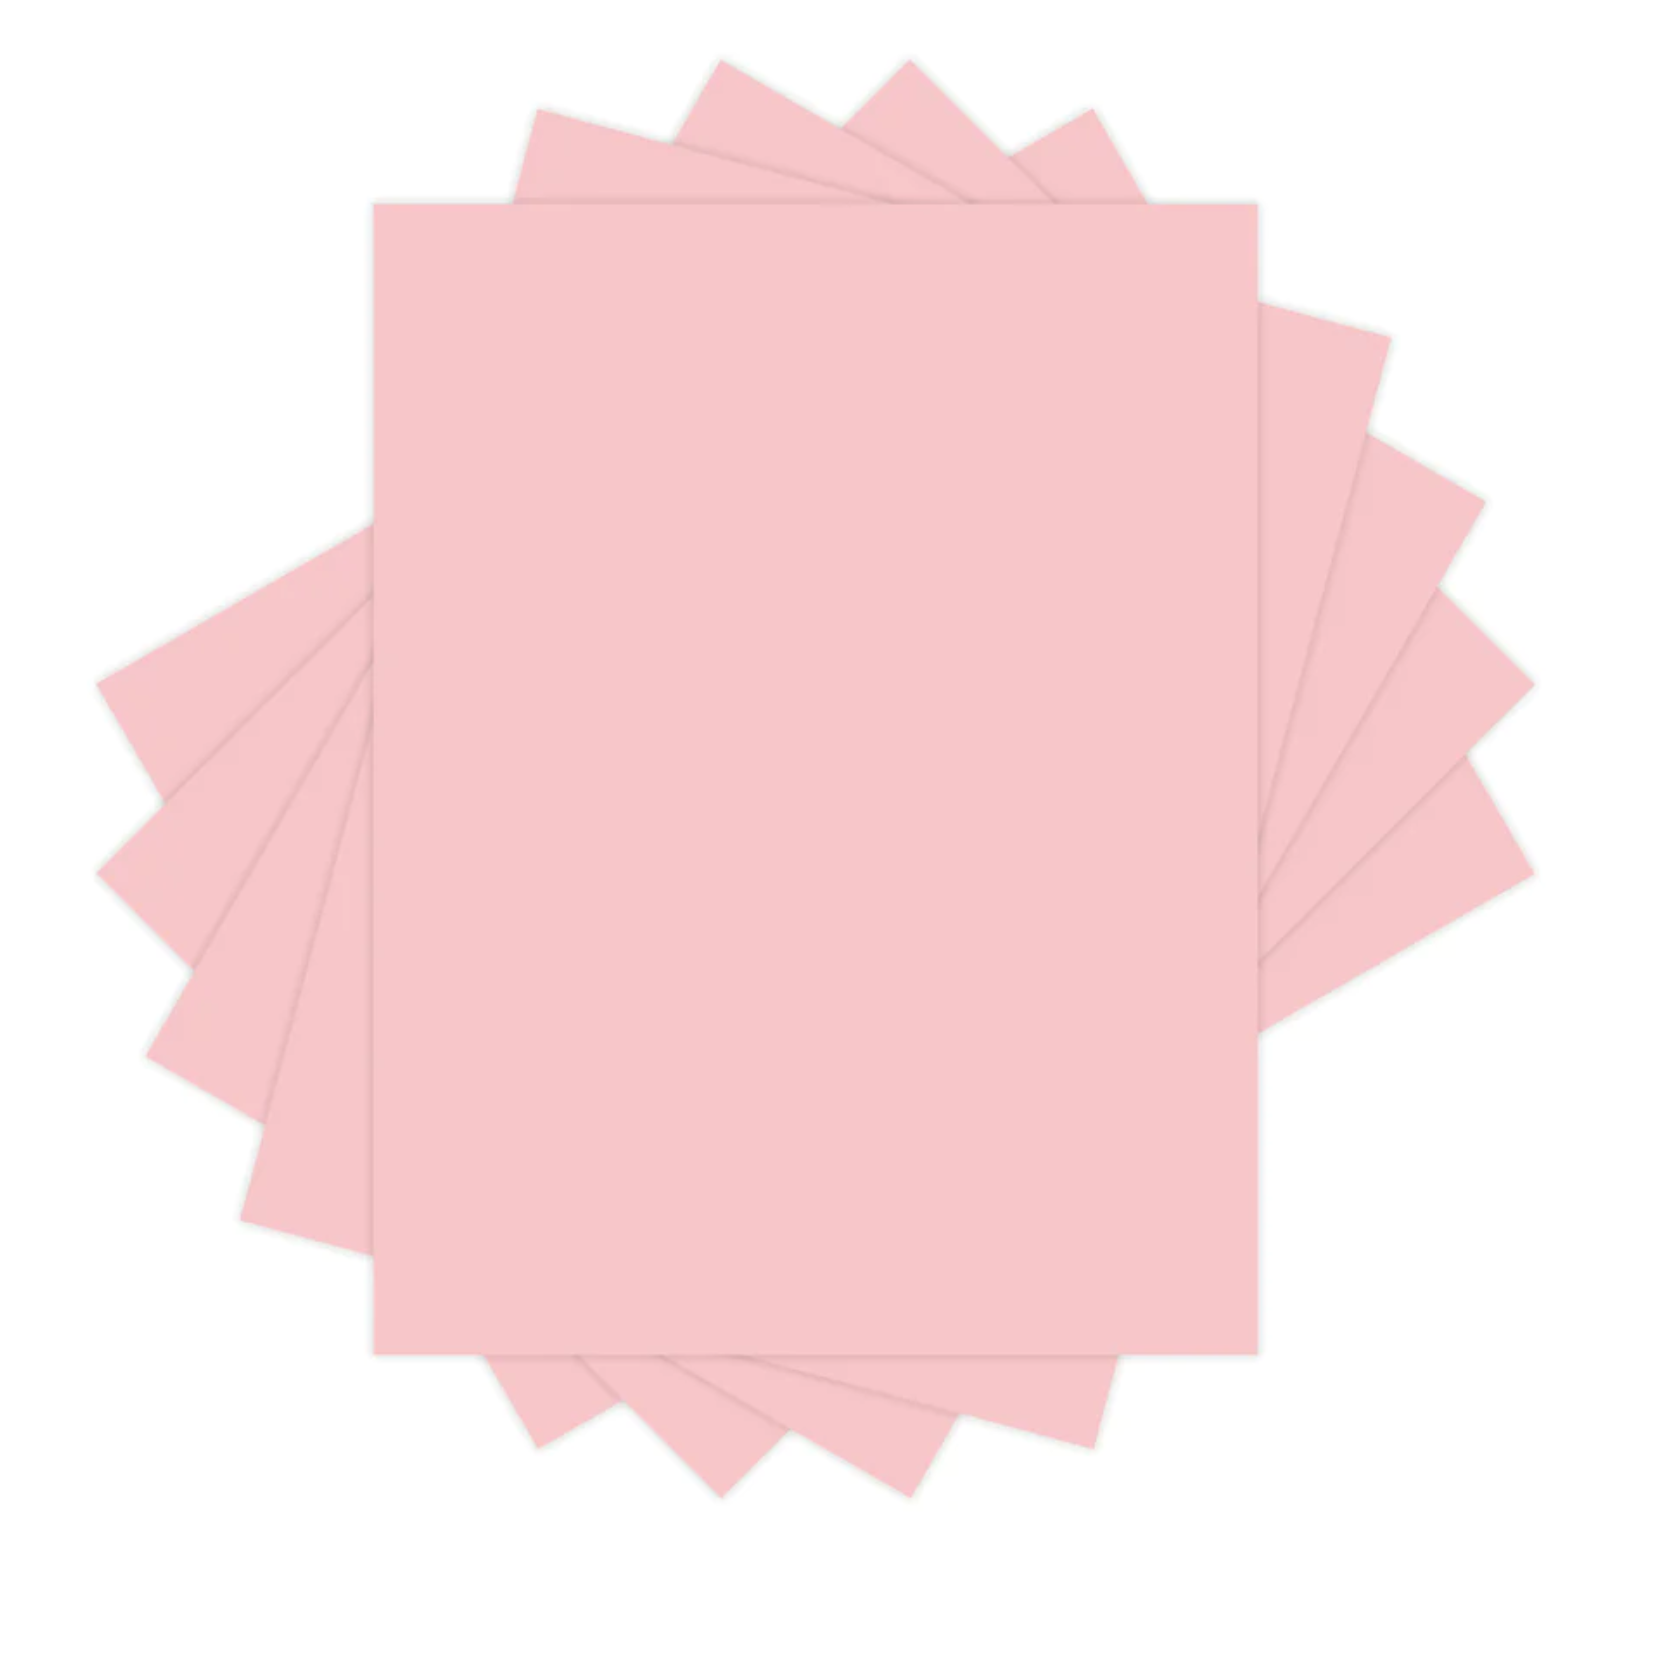 Lettermark Multipurpose Pink Colored Paper 8.5x11 500ct